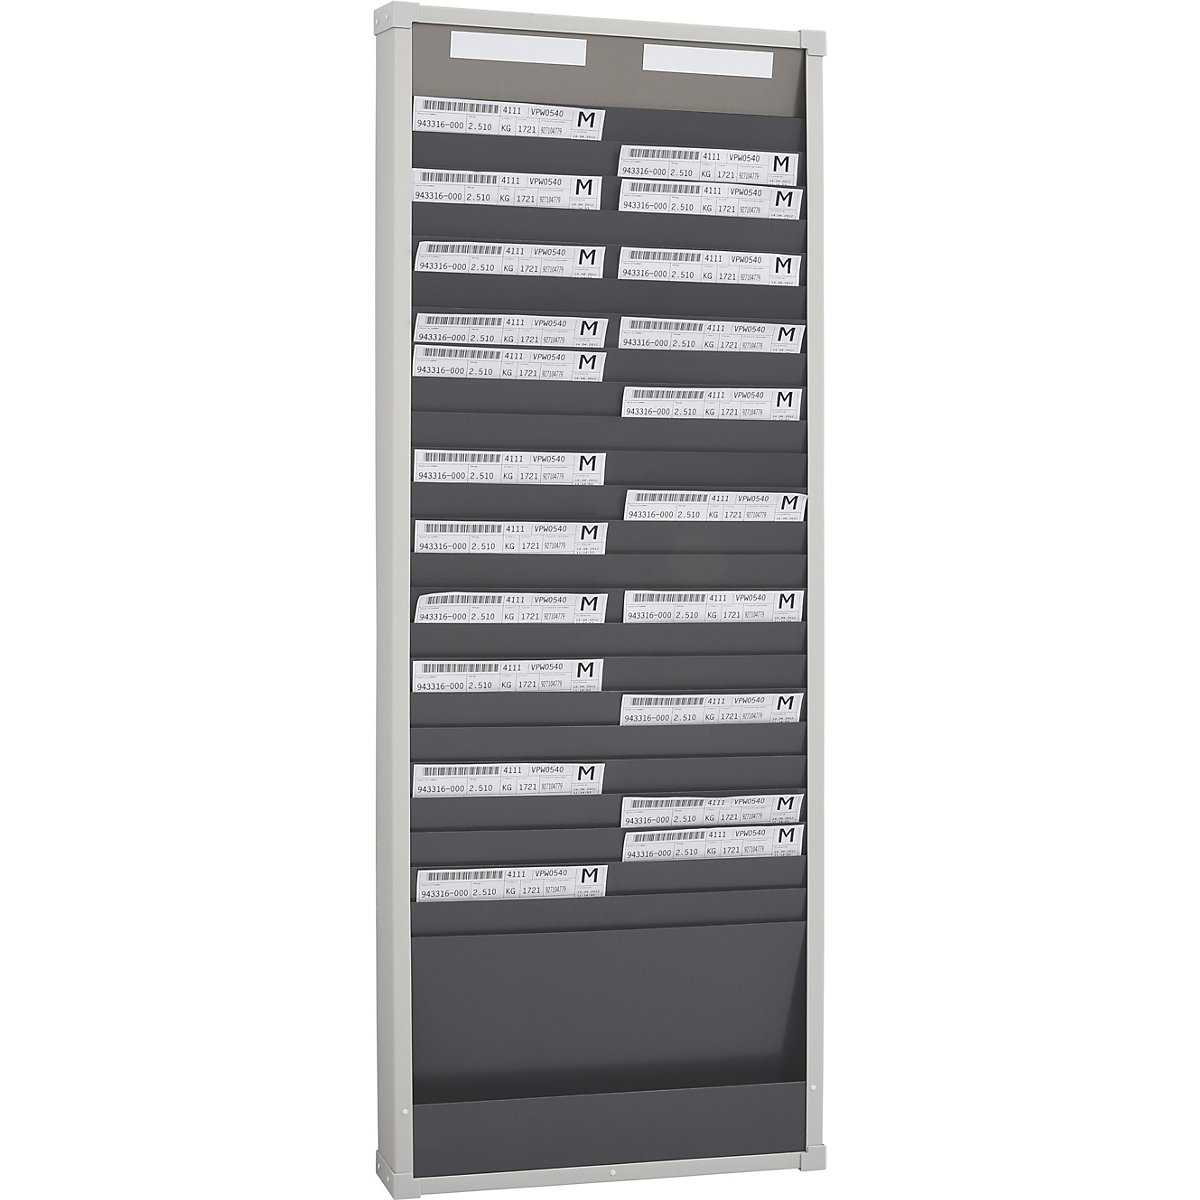 Card sorting board system – EICHNER, 25 compartments, height 1350 mm, with 2 rows-8